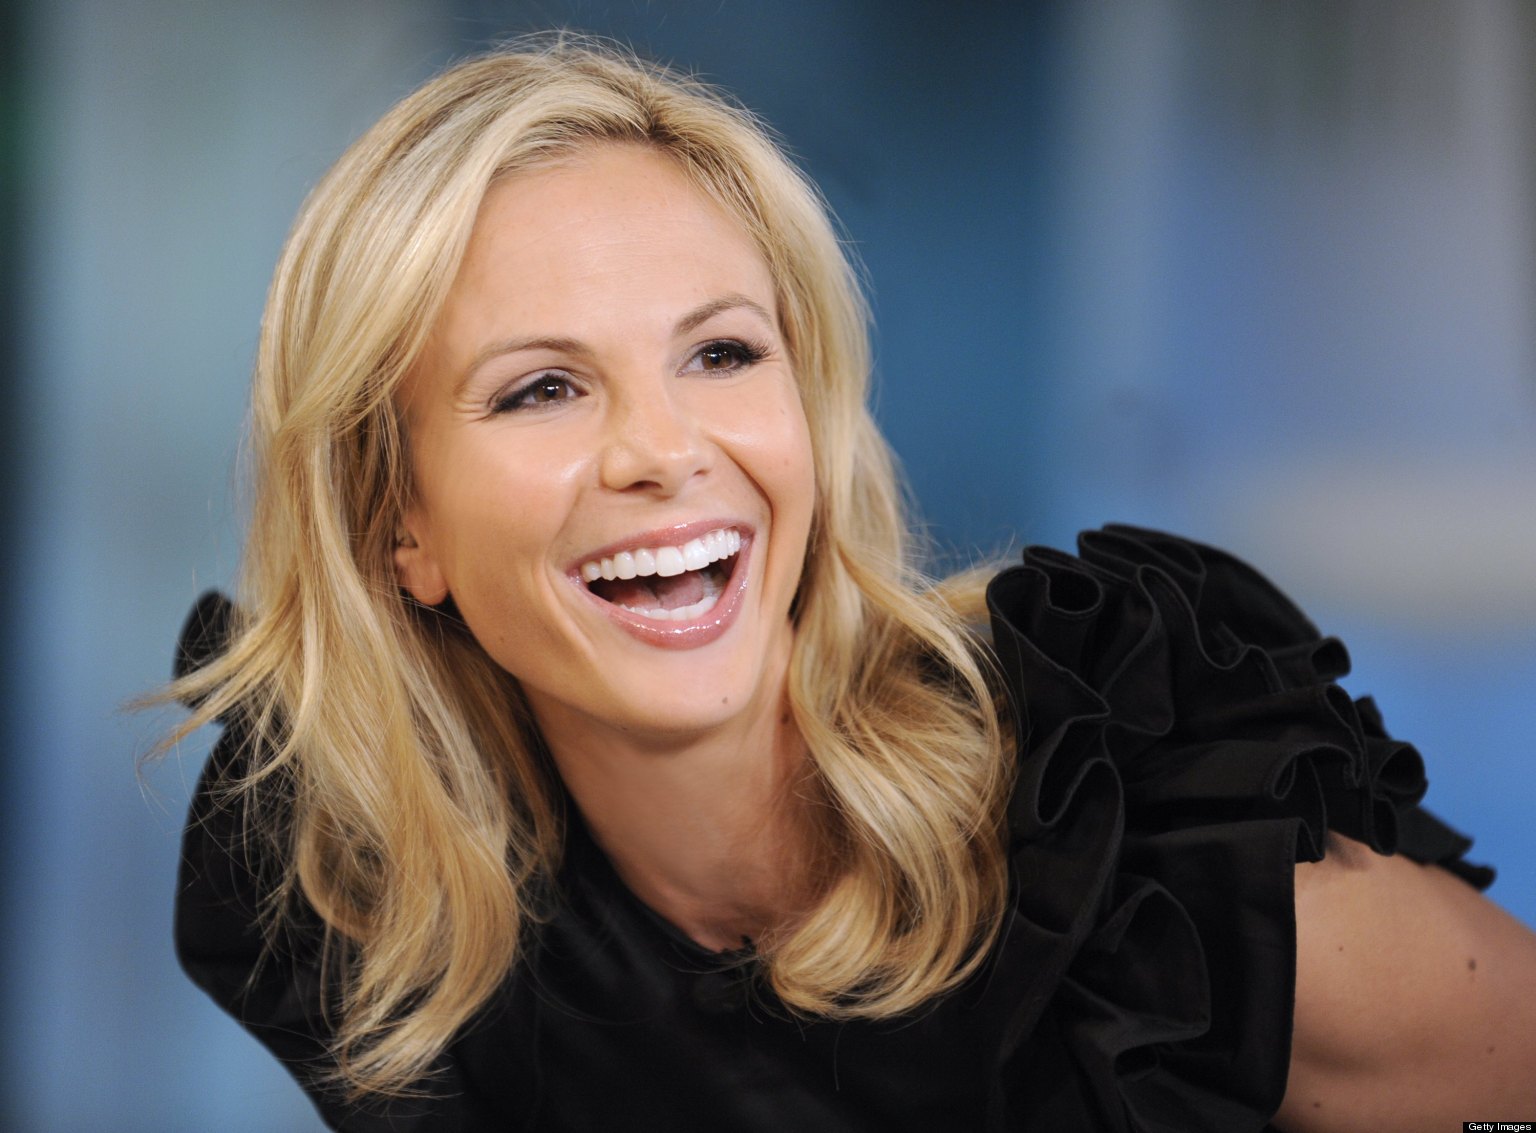 Elisabeth Hasselbeck's Most Political 'View' Moments (PHOTOS) | HuffPost1536 x 1133